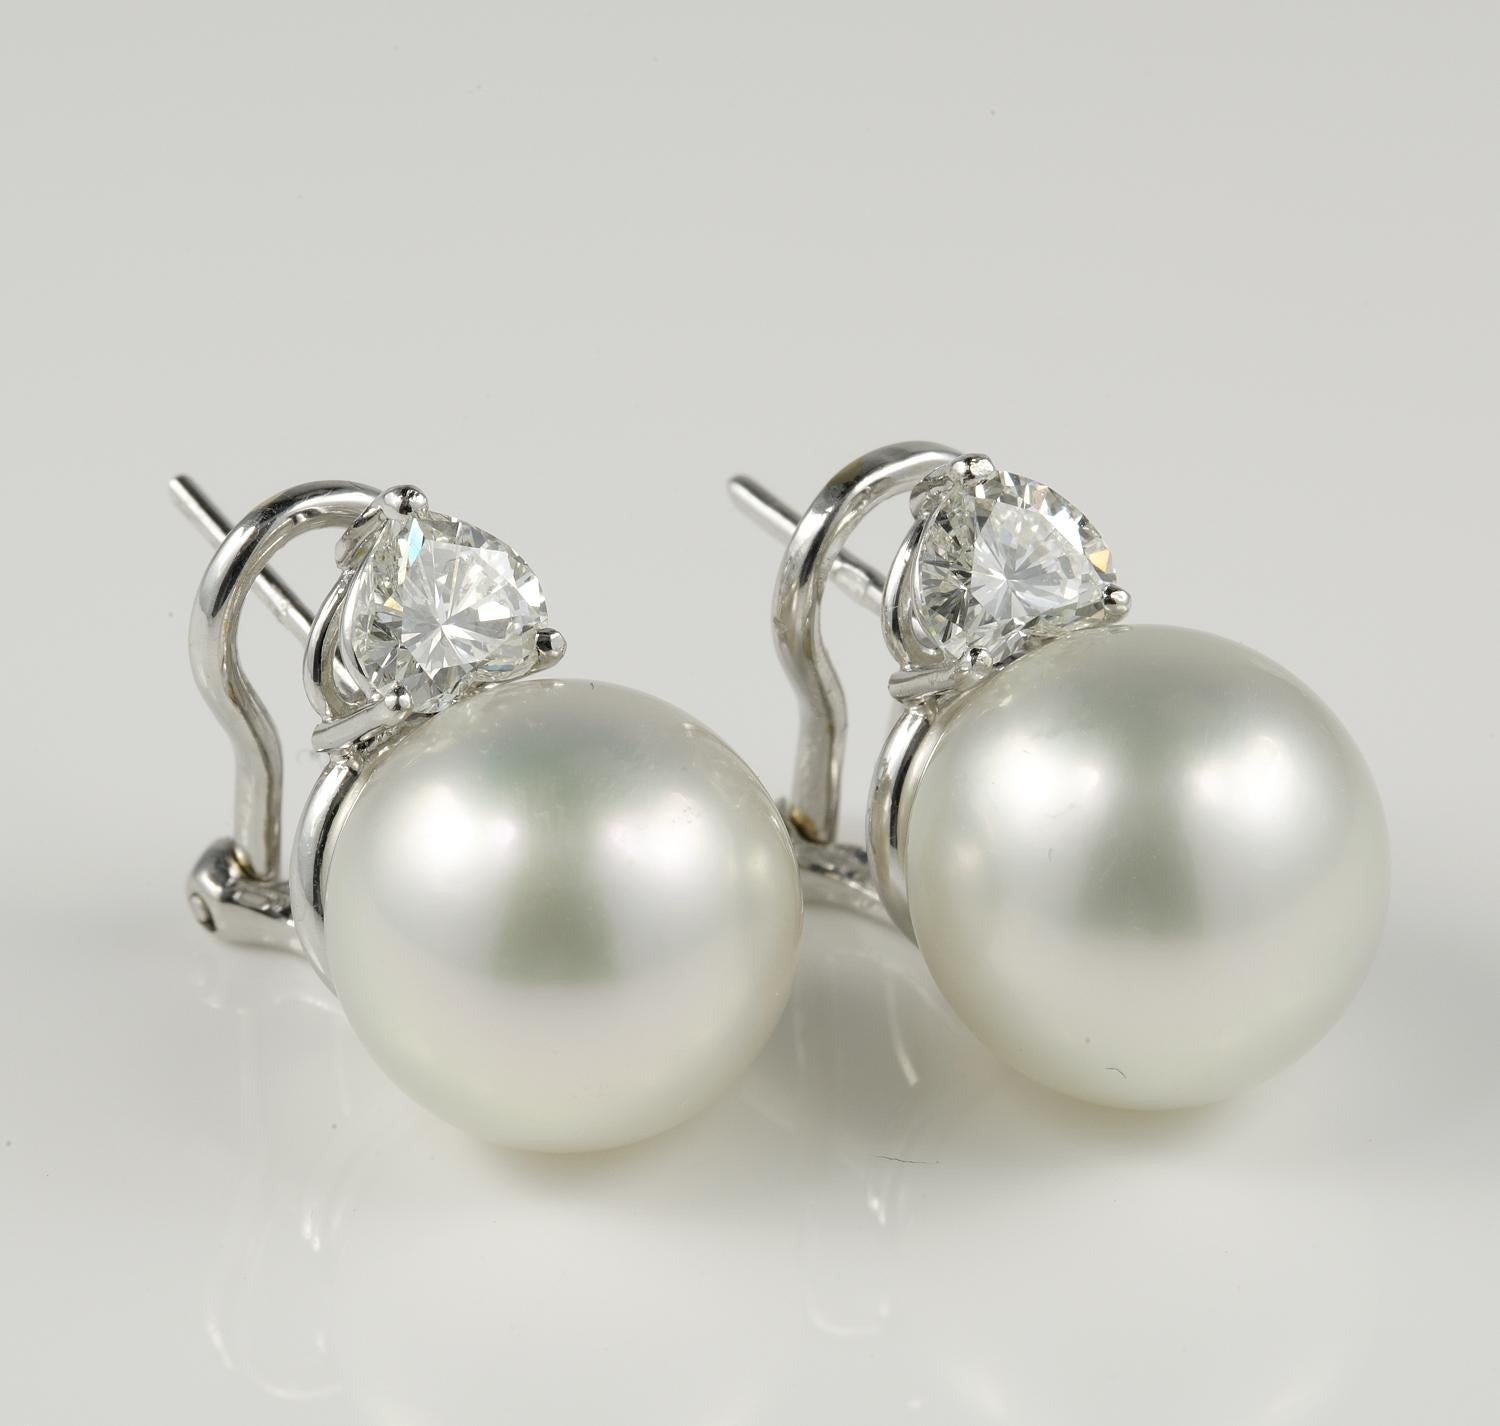 Queen of Seas

Outstanding vintage AAA quality Australian South Sea Pearl Earrings for matching pair, roundness, skin perfection, colour match, blemish free, excellent lustre 

They are 12 mm. in size, white silver colour, topped by two fabulous